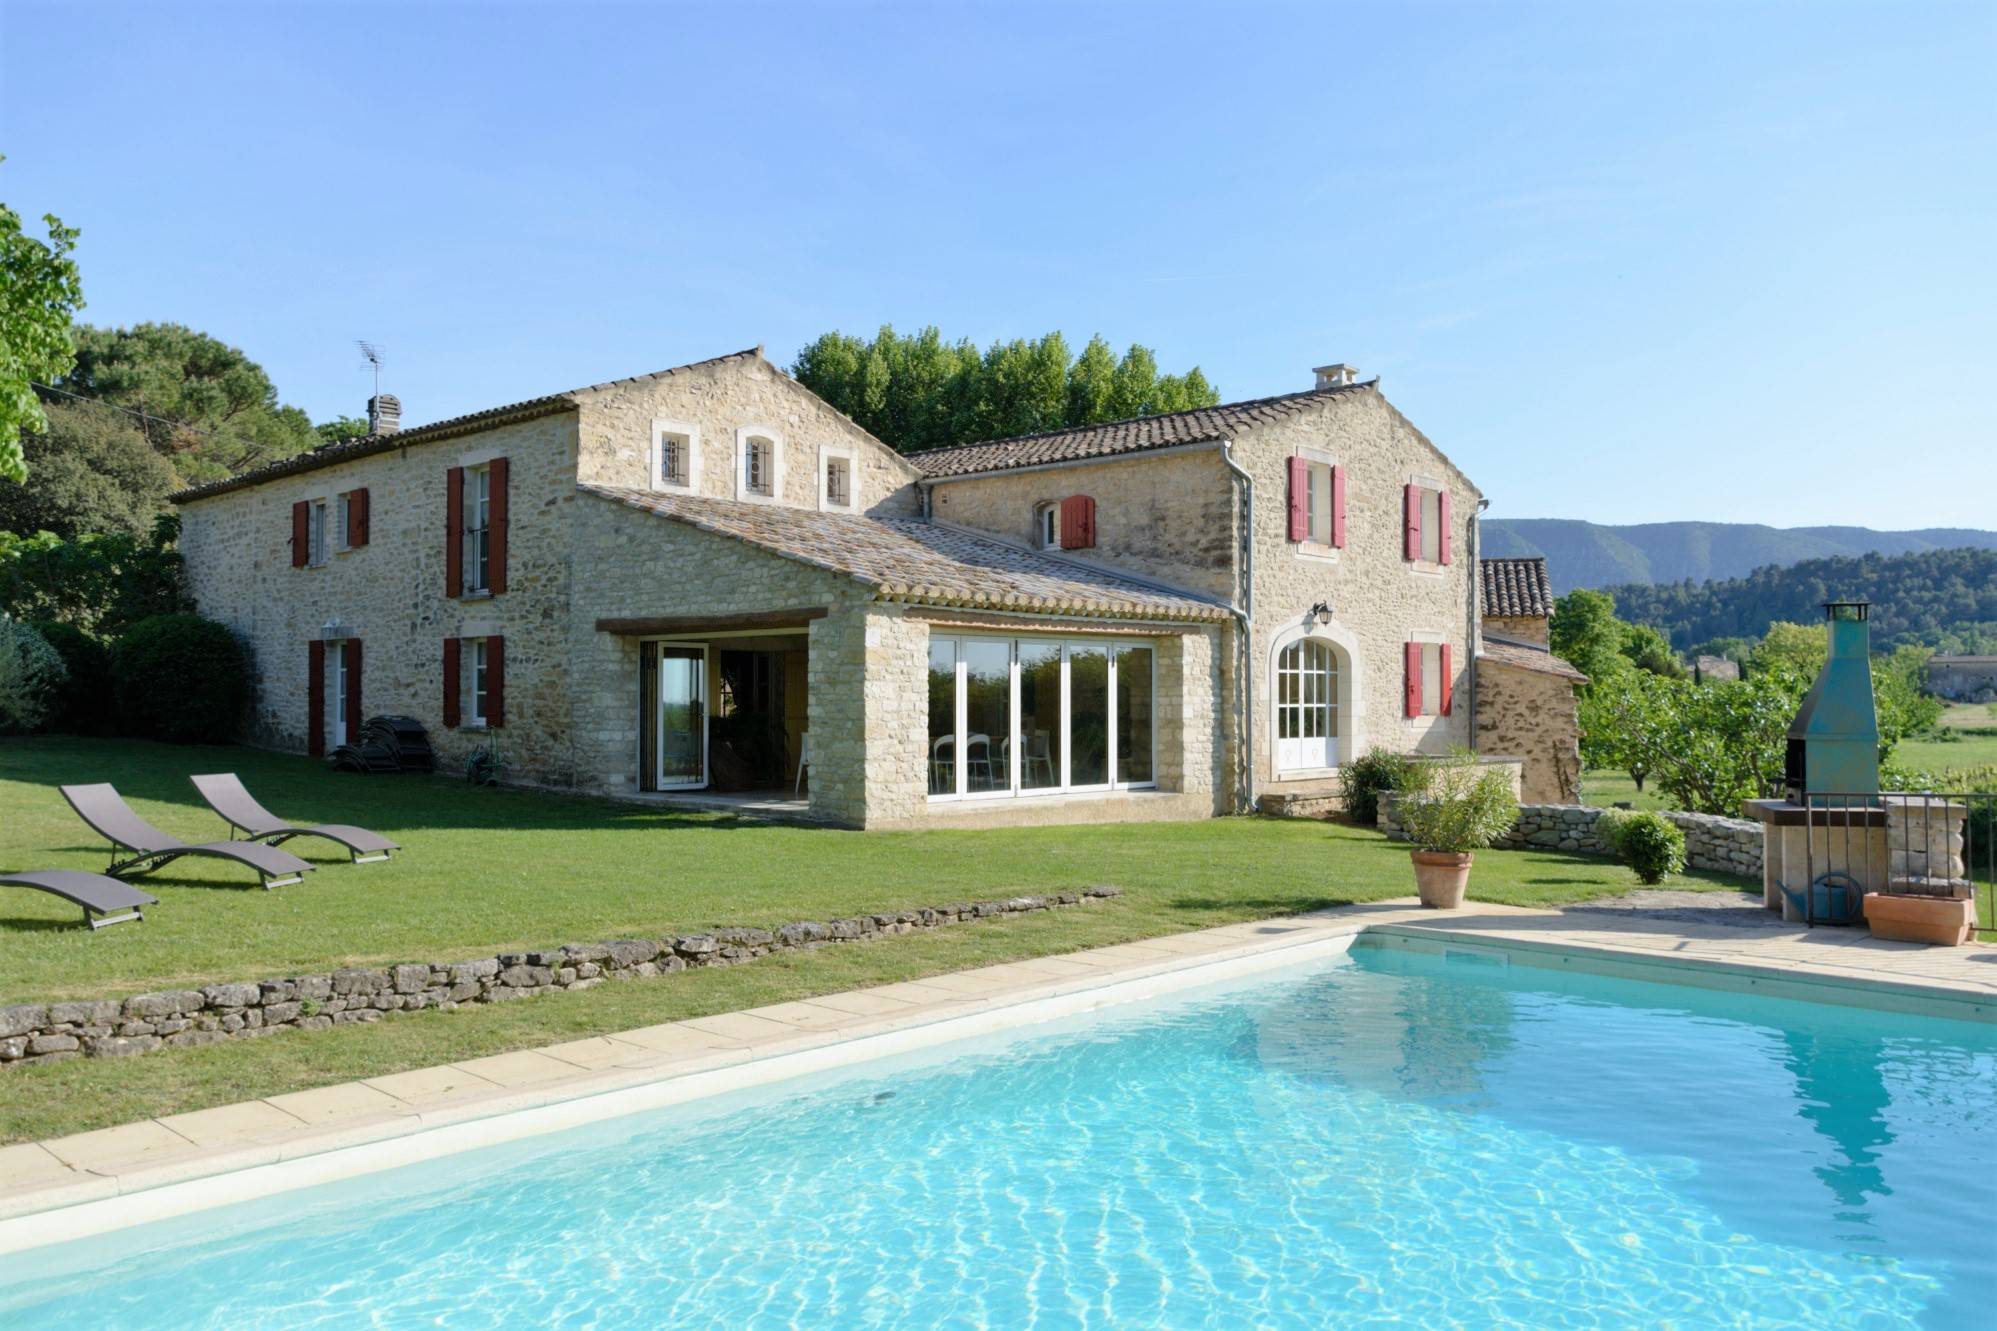 In Ménerbes, 18th century farmhouse, entirely restored, with swimming pool